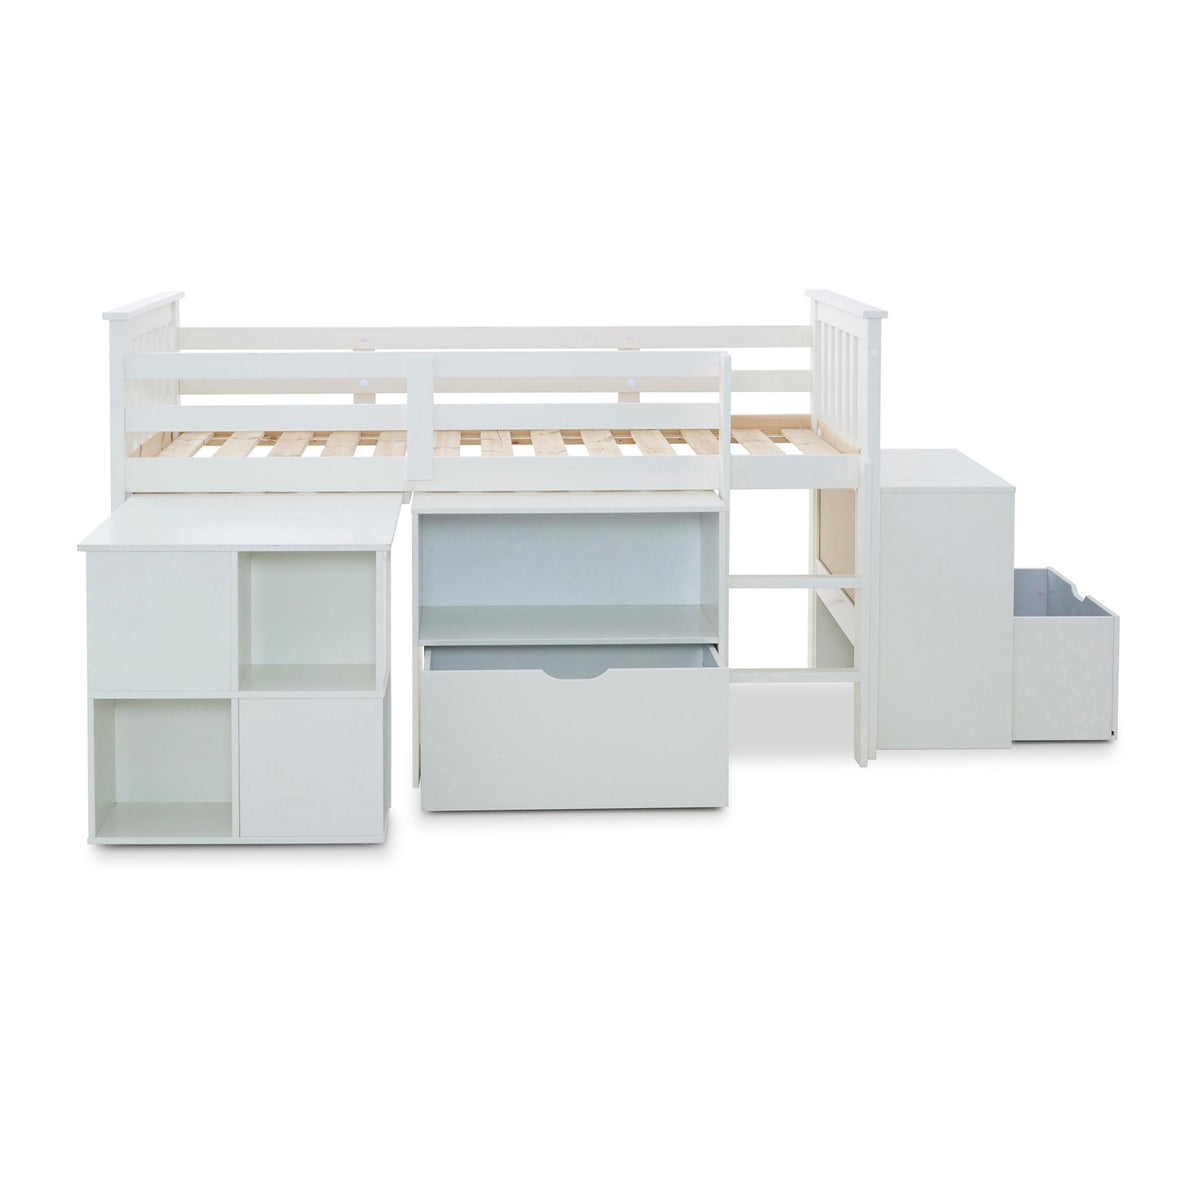 side view of the Huckerby White Childrens Sleep Station Storage Bed with storage cupboards